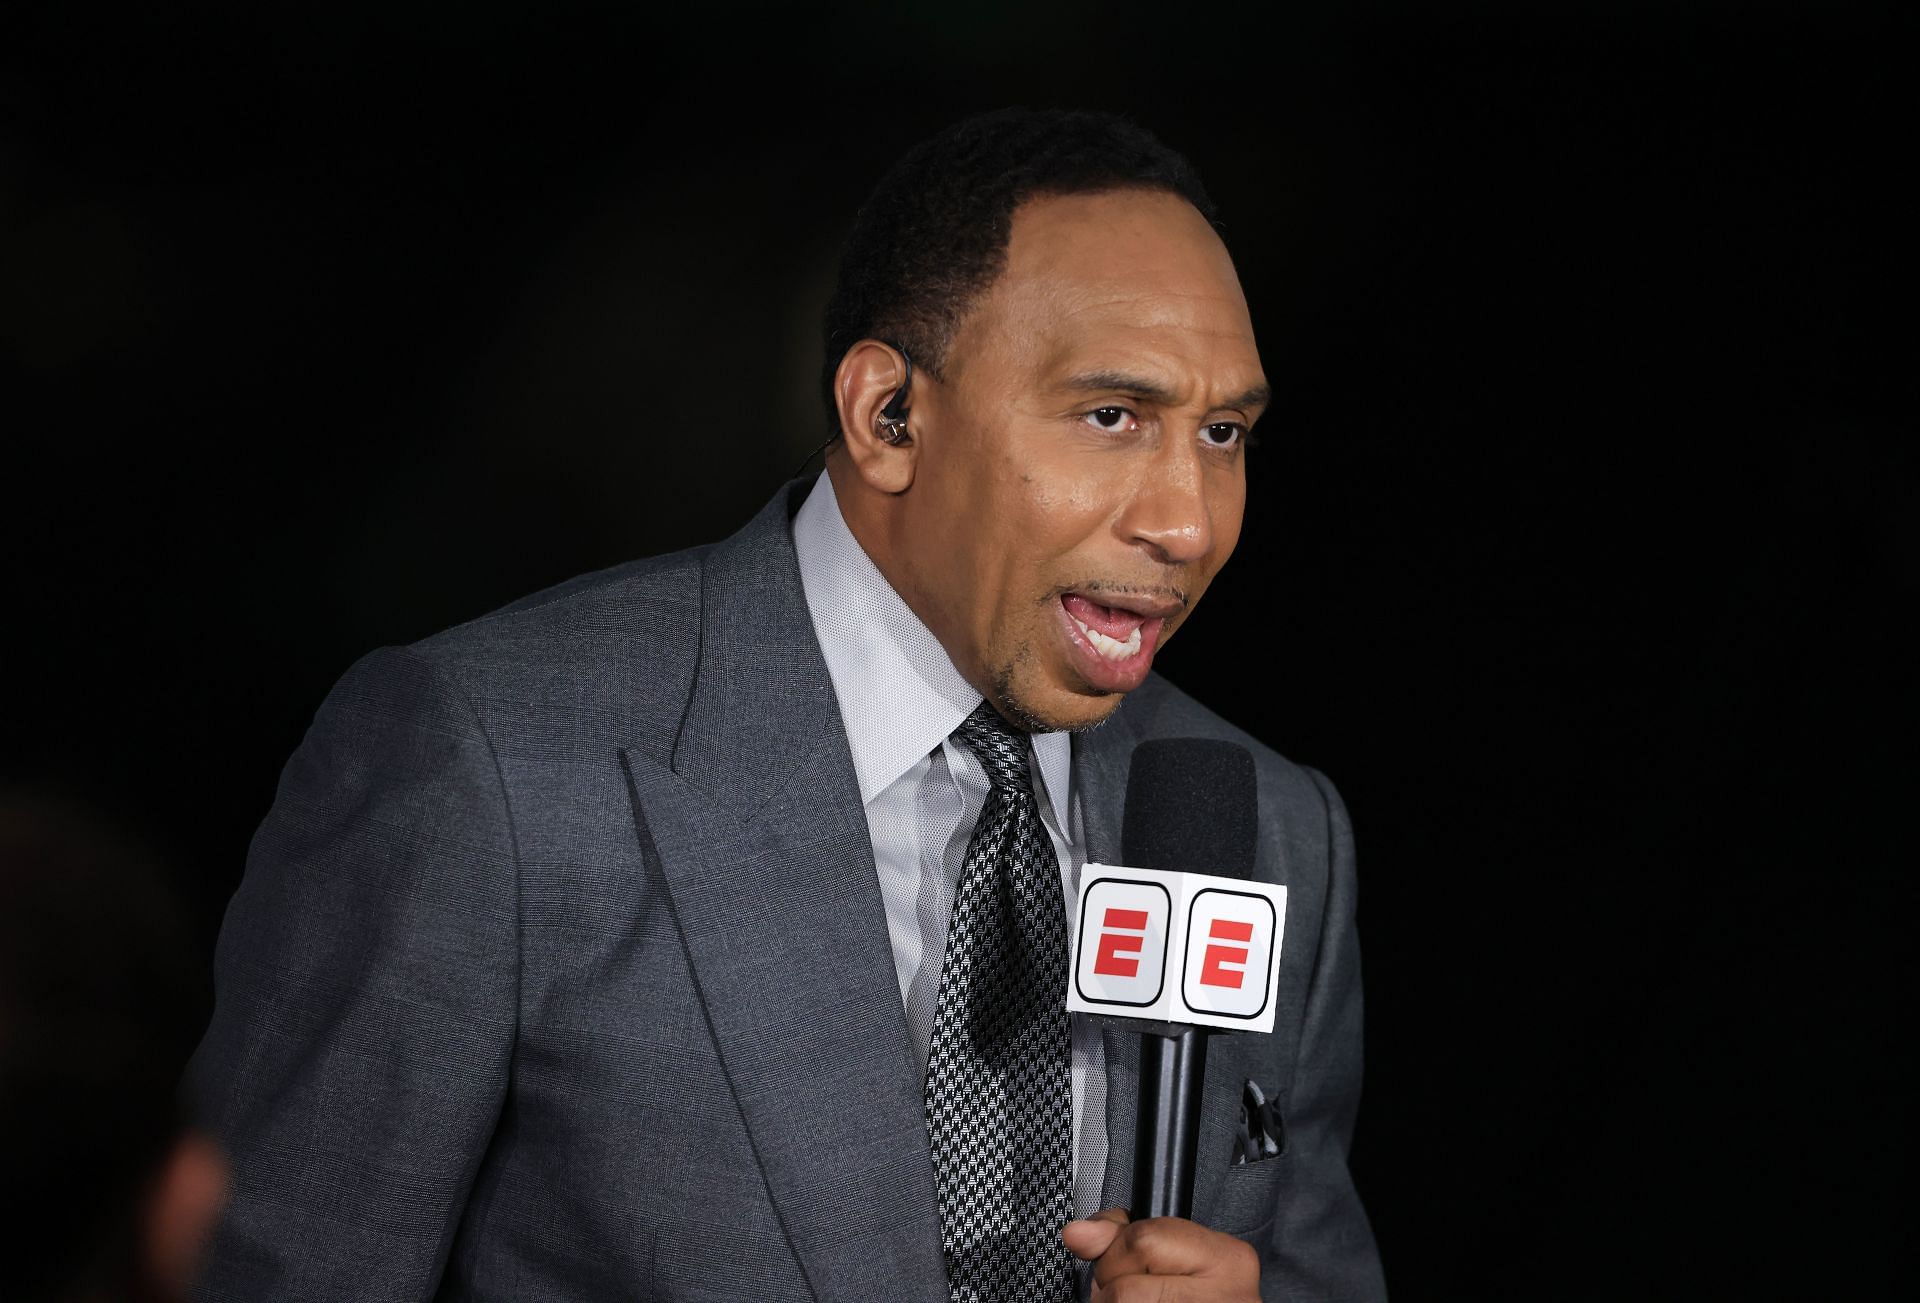 ESPN analyst Stephen A. Smith during Game Three of the NBA Finals